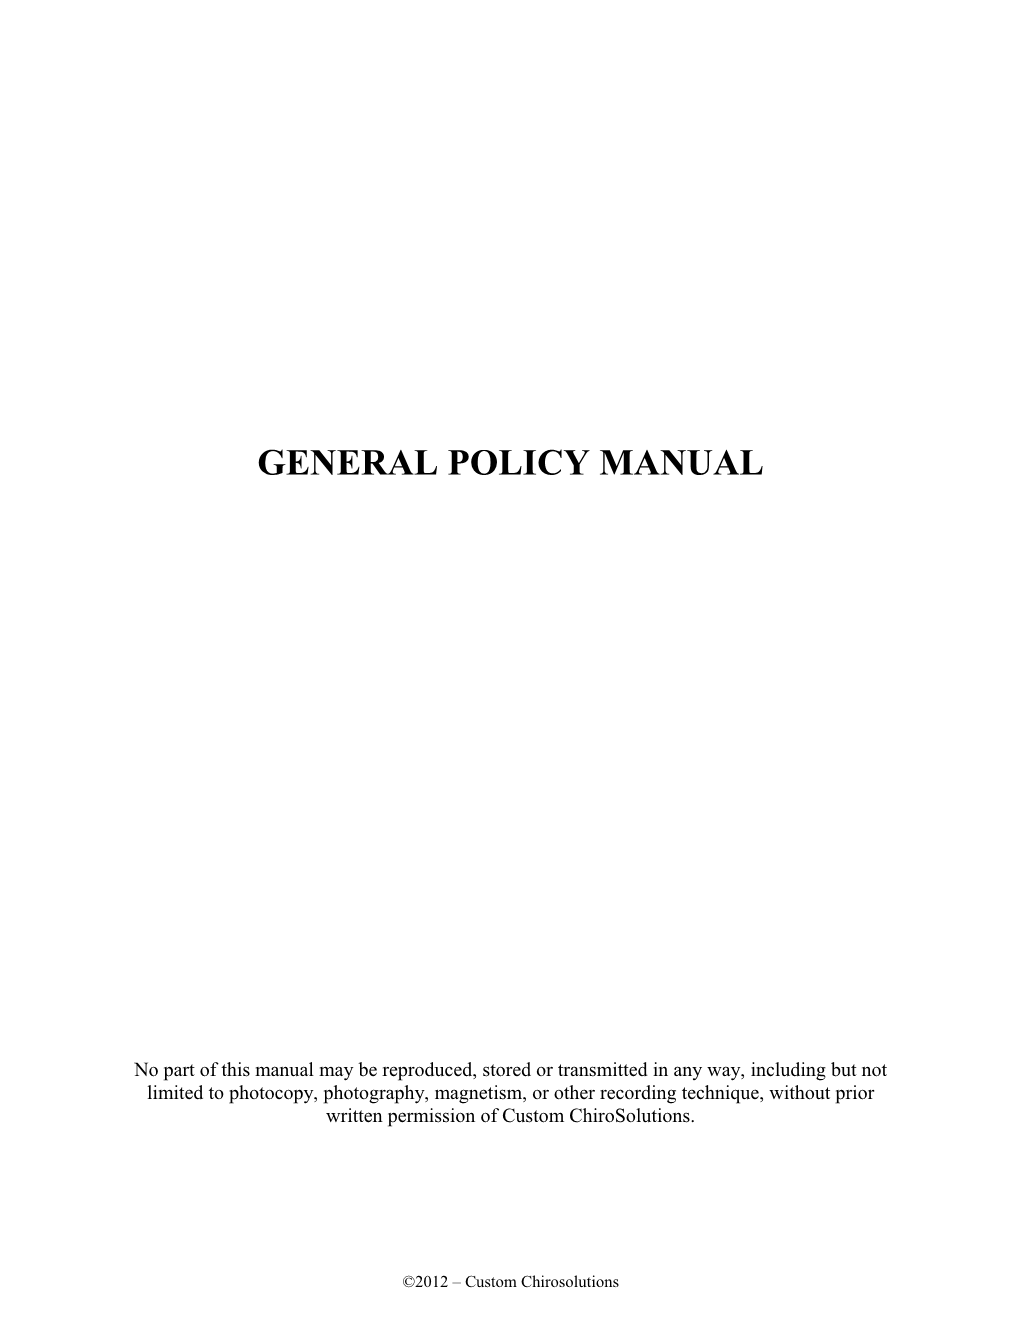 General Policy Manual